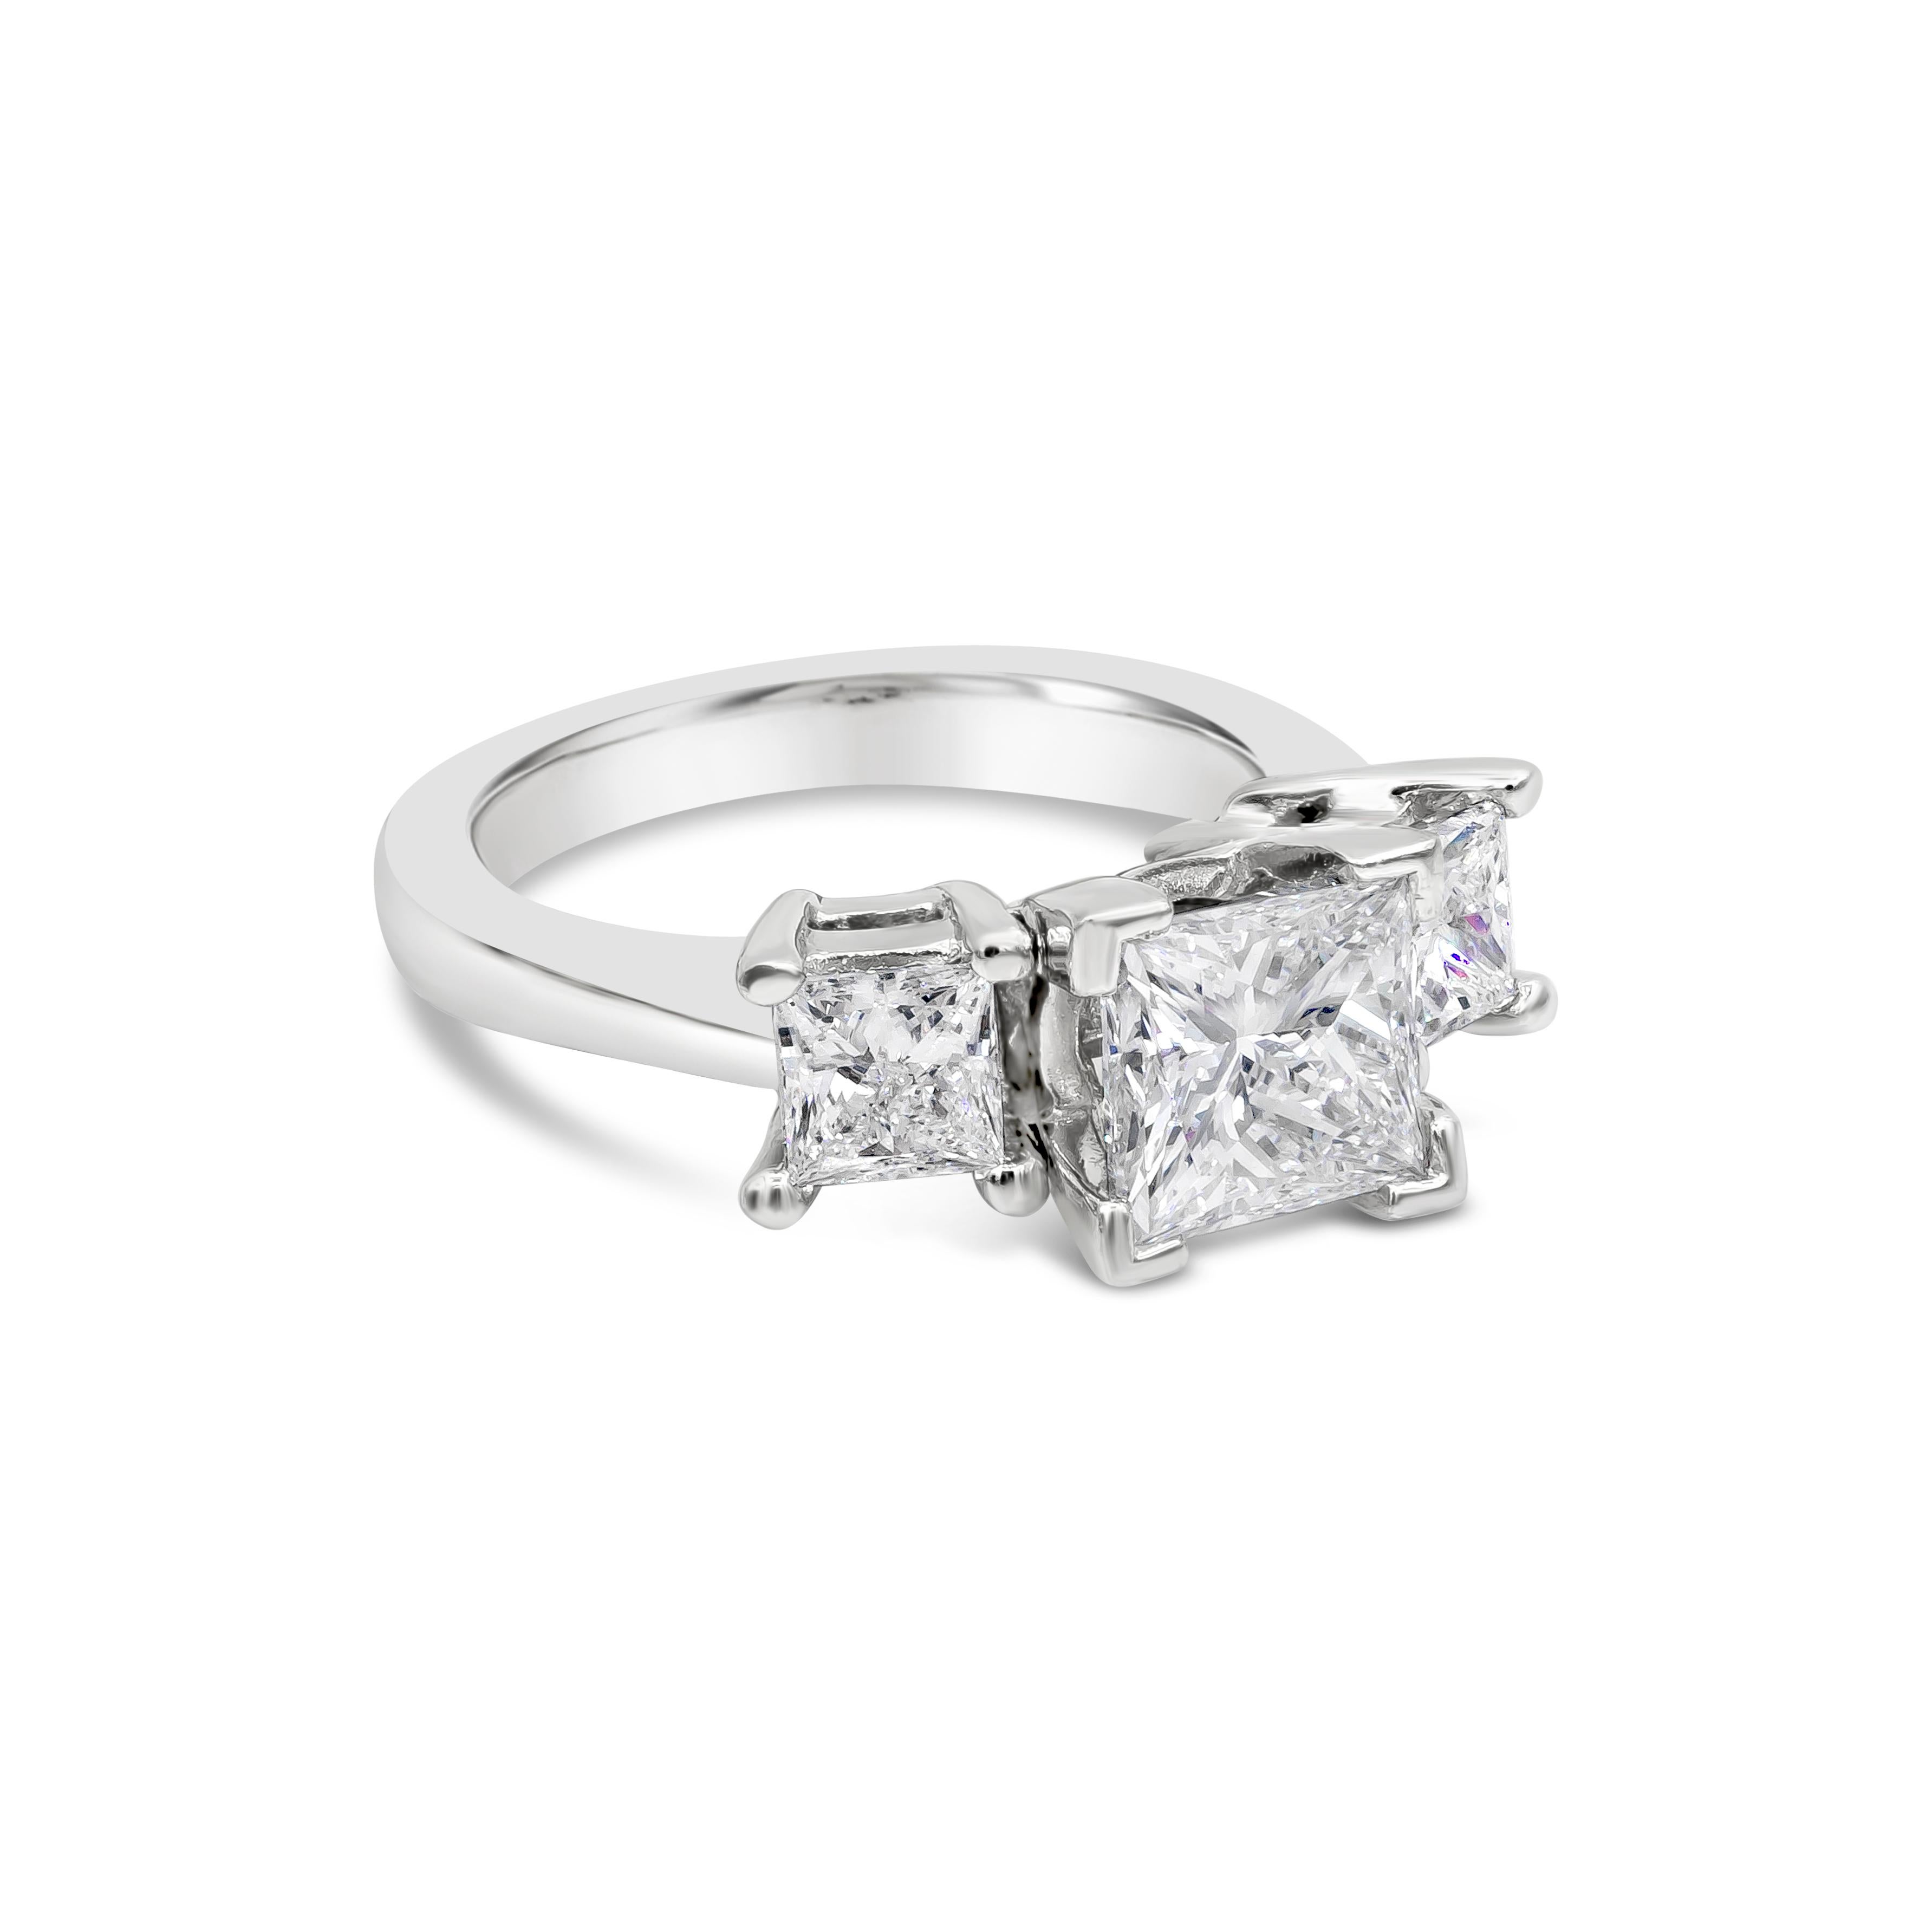 A timeless and popular engagement ring style showcasing a 1.70 carat princess cut diamond flanked by two smaller princess cut diamonds weighing 0.80 carats total. GIA certified the center diamond as F color, SI2 clarity. Set in an tapering platinum